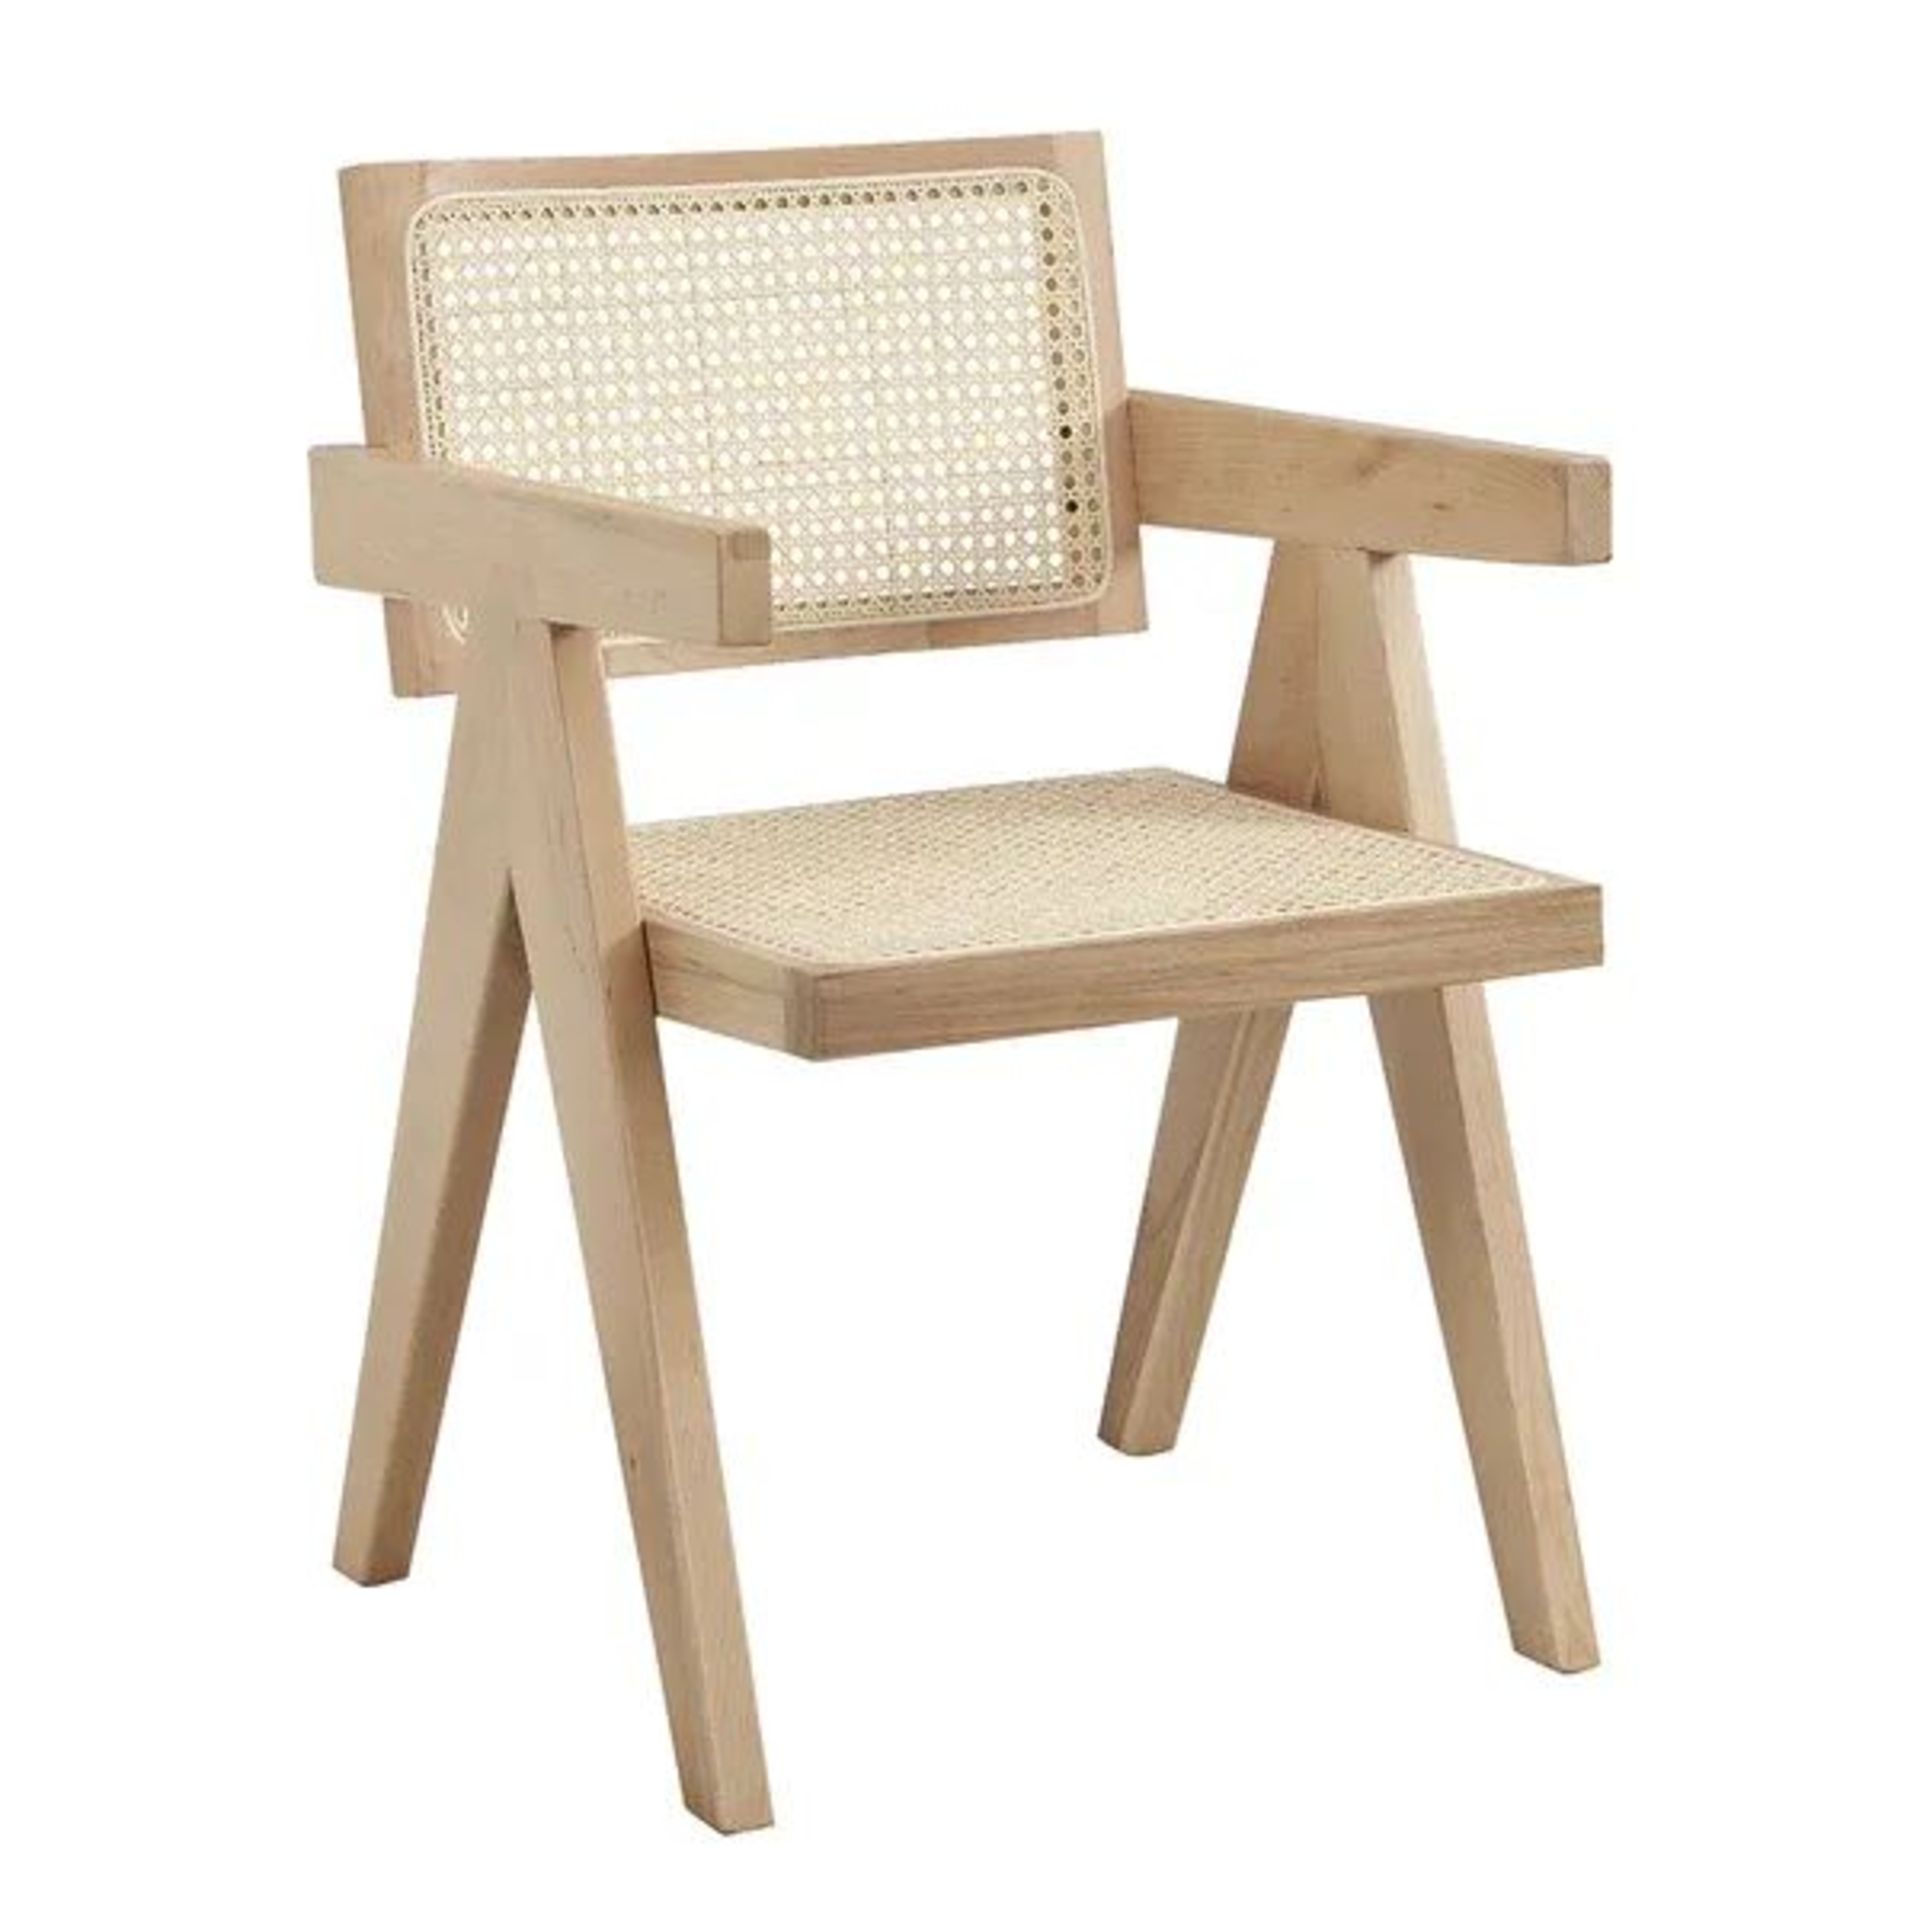 Jeanne Natural Colour Cane Rattan Solid Beech Wood Dining Chair. - SR25. RRP £199.99. The cane - Image 2 of 2